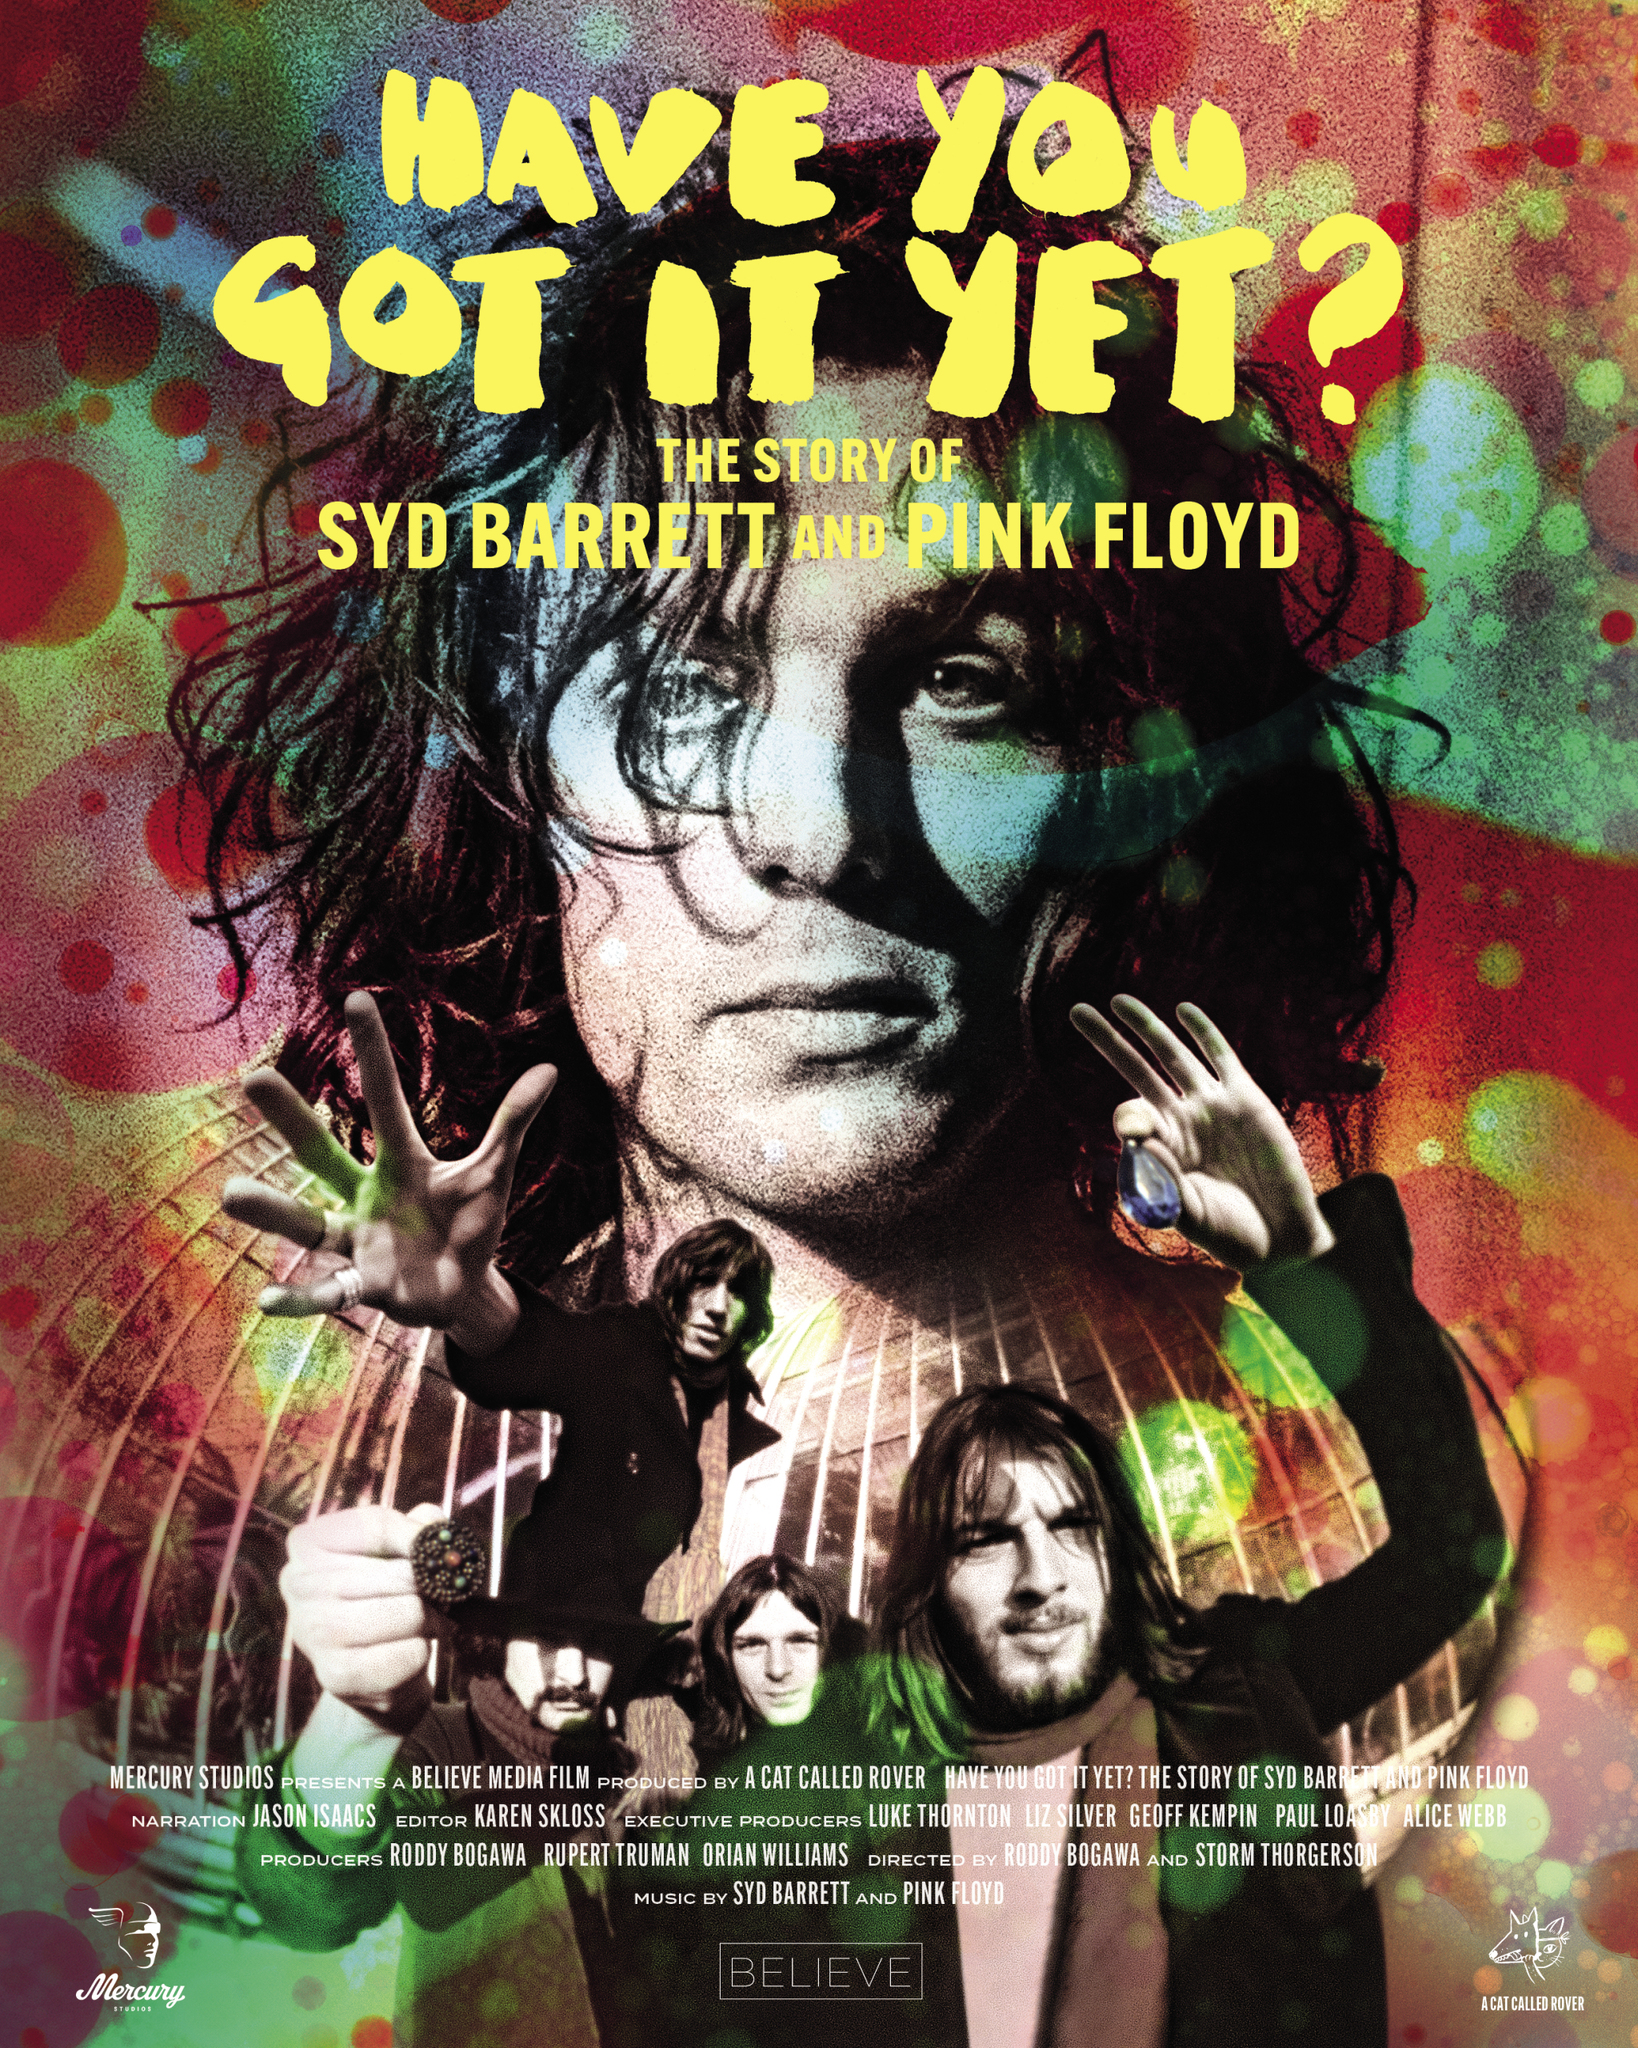 MERCURY STUDIOS DEBUTS TRAILER FOR “HAVE YOU GOT IT YET?” THE STORY OF SYD BARRETT AND PINK FLOYD